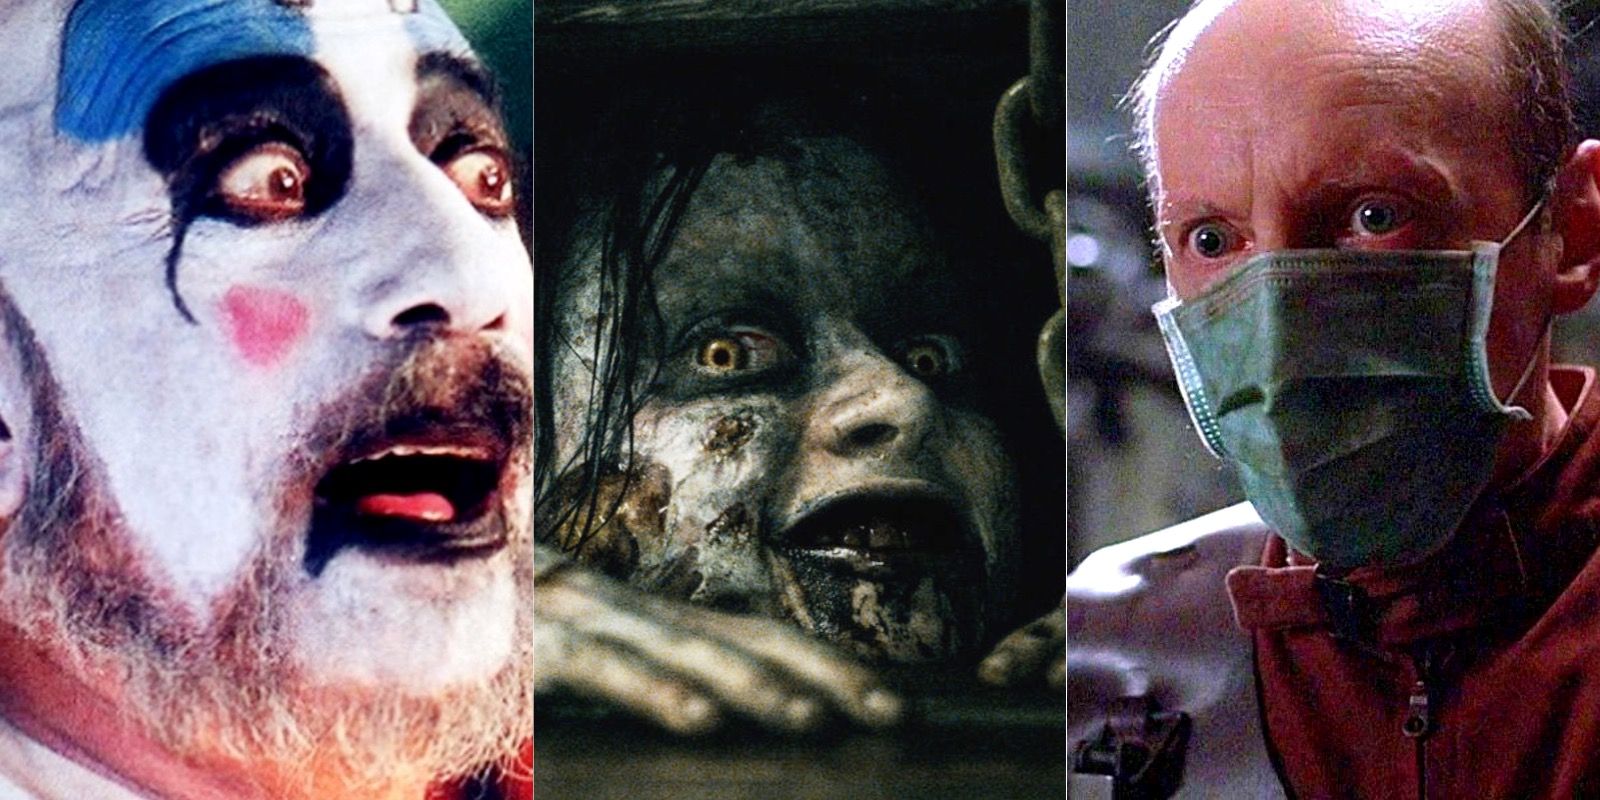 House Of 1000 Corpses, Evil Dead and Hostel